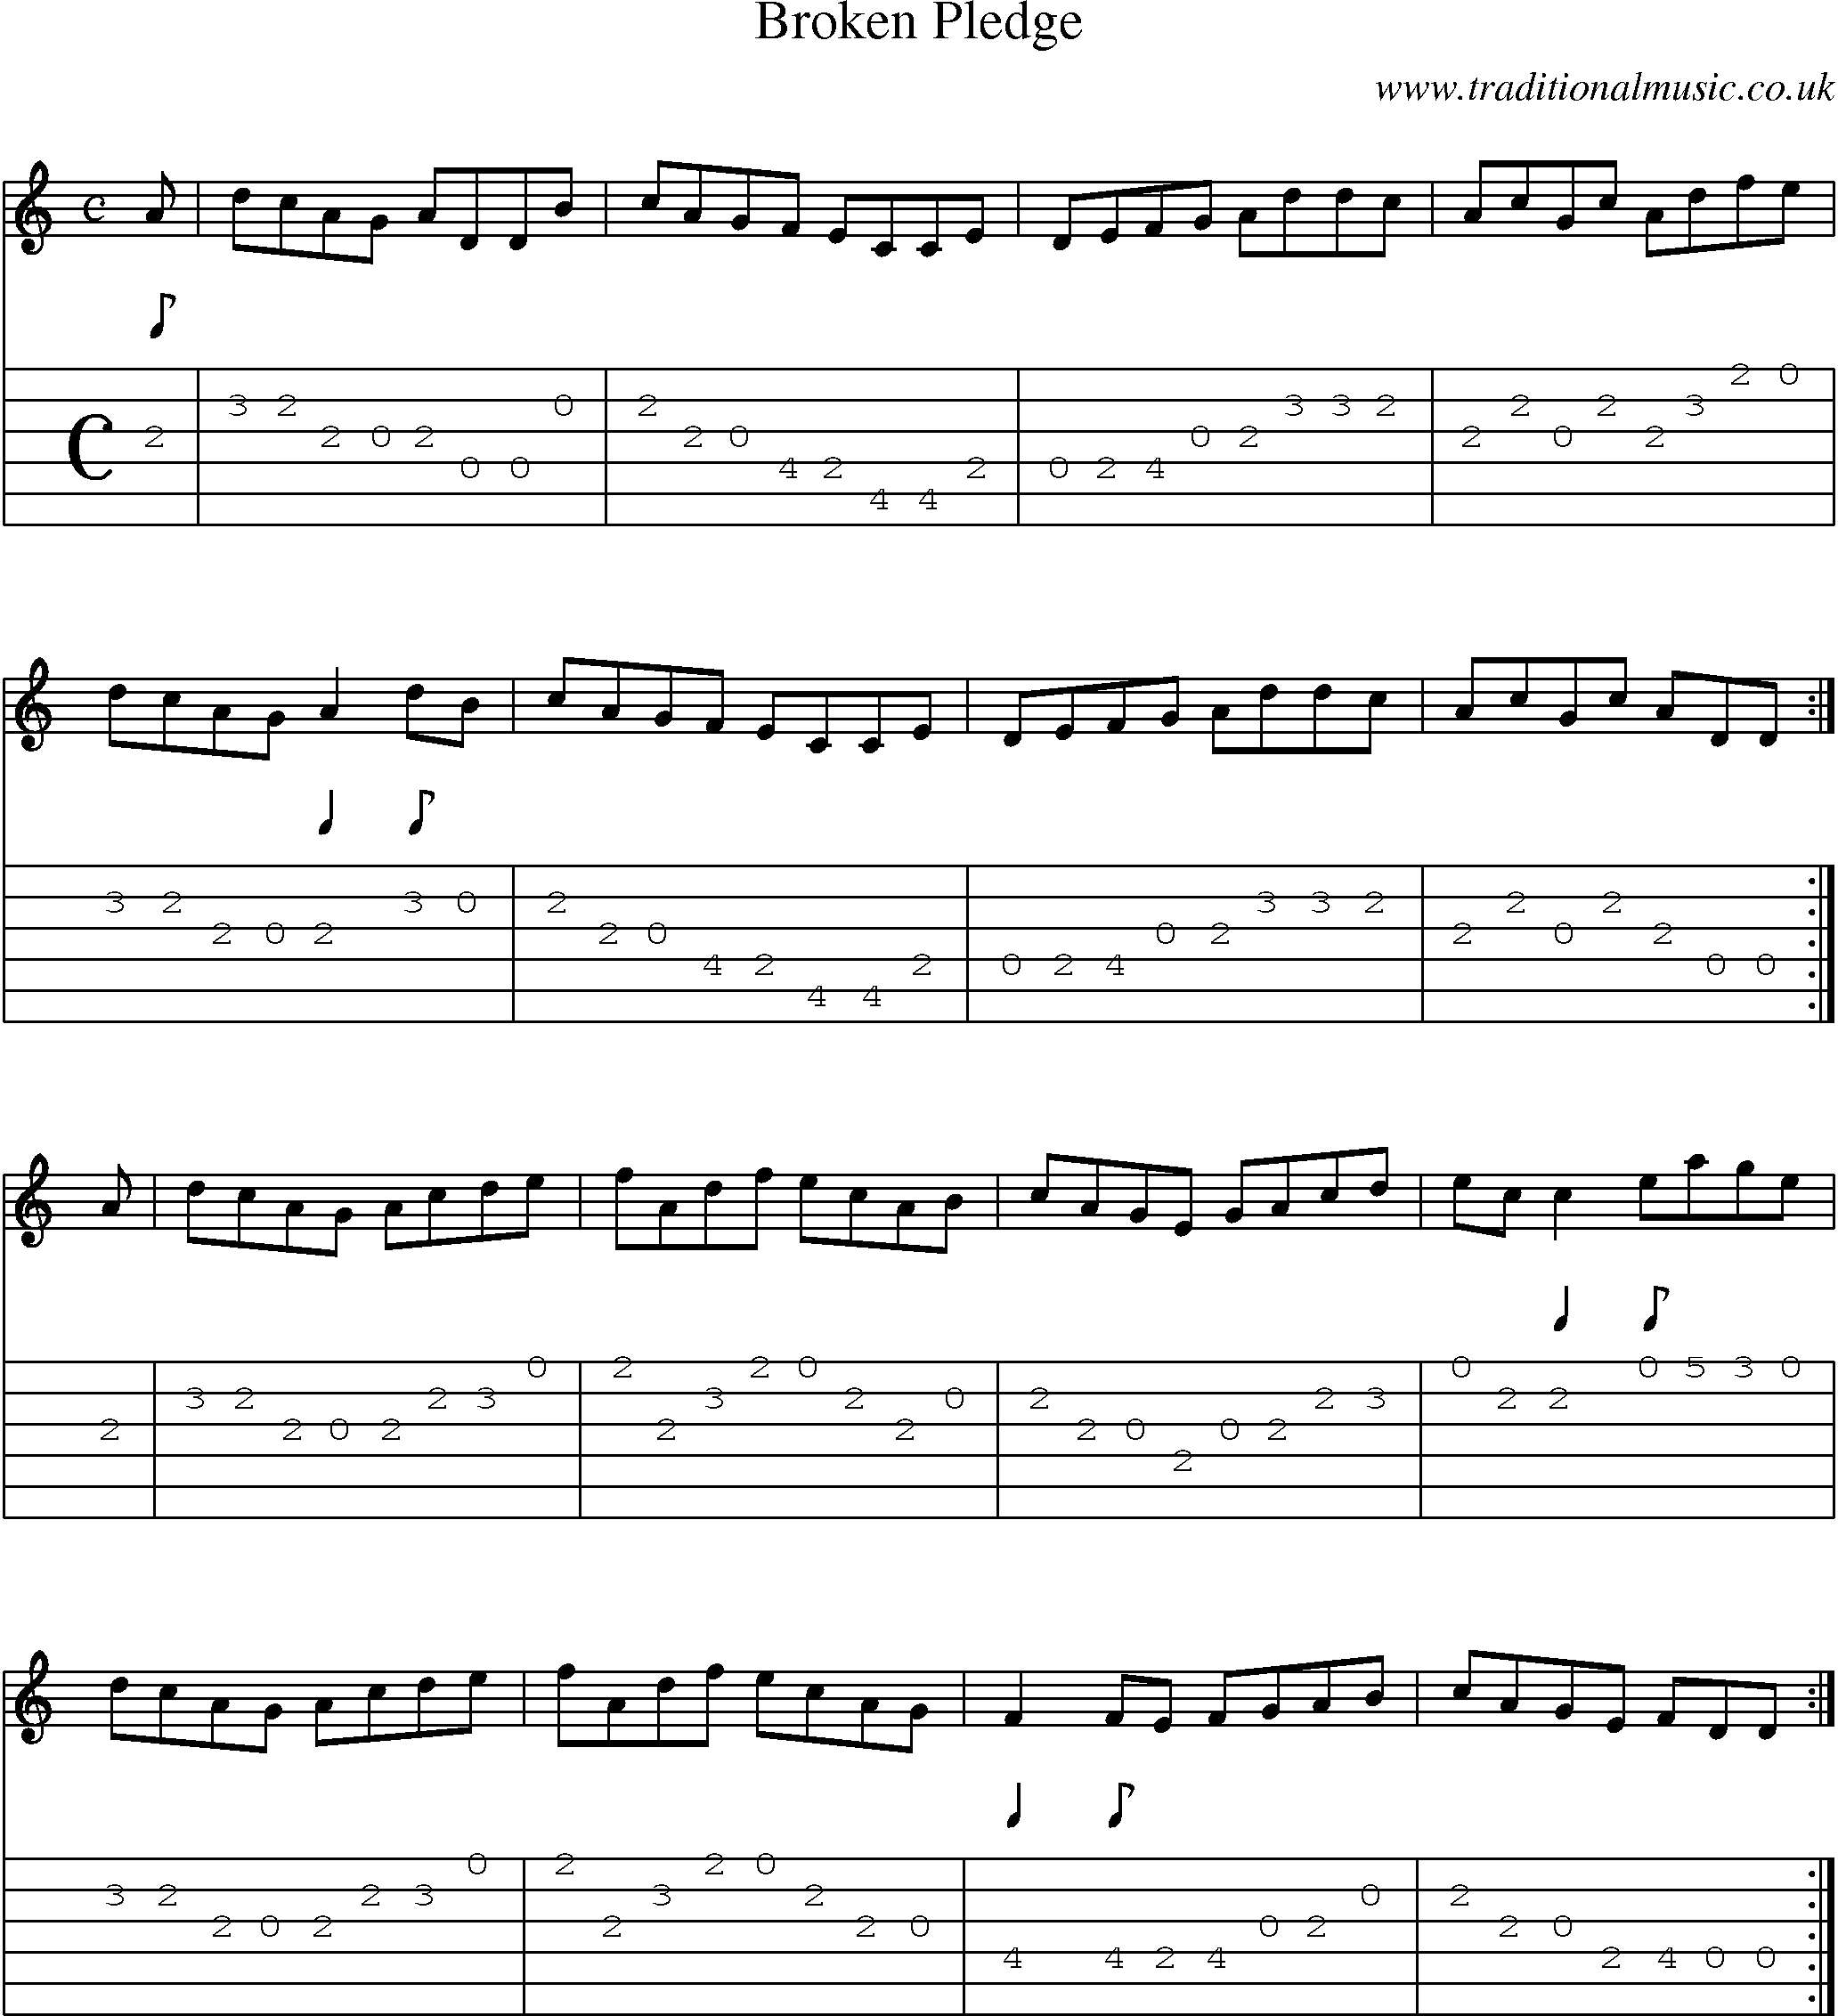 Music Score and Guitar Tabs for Broken Pledge